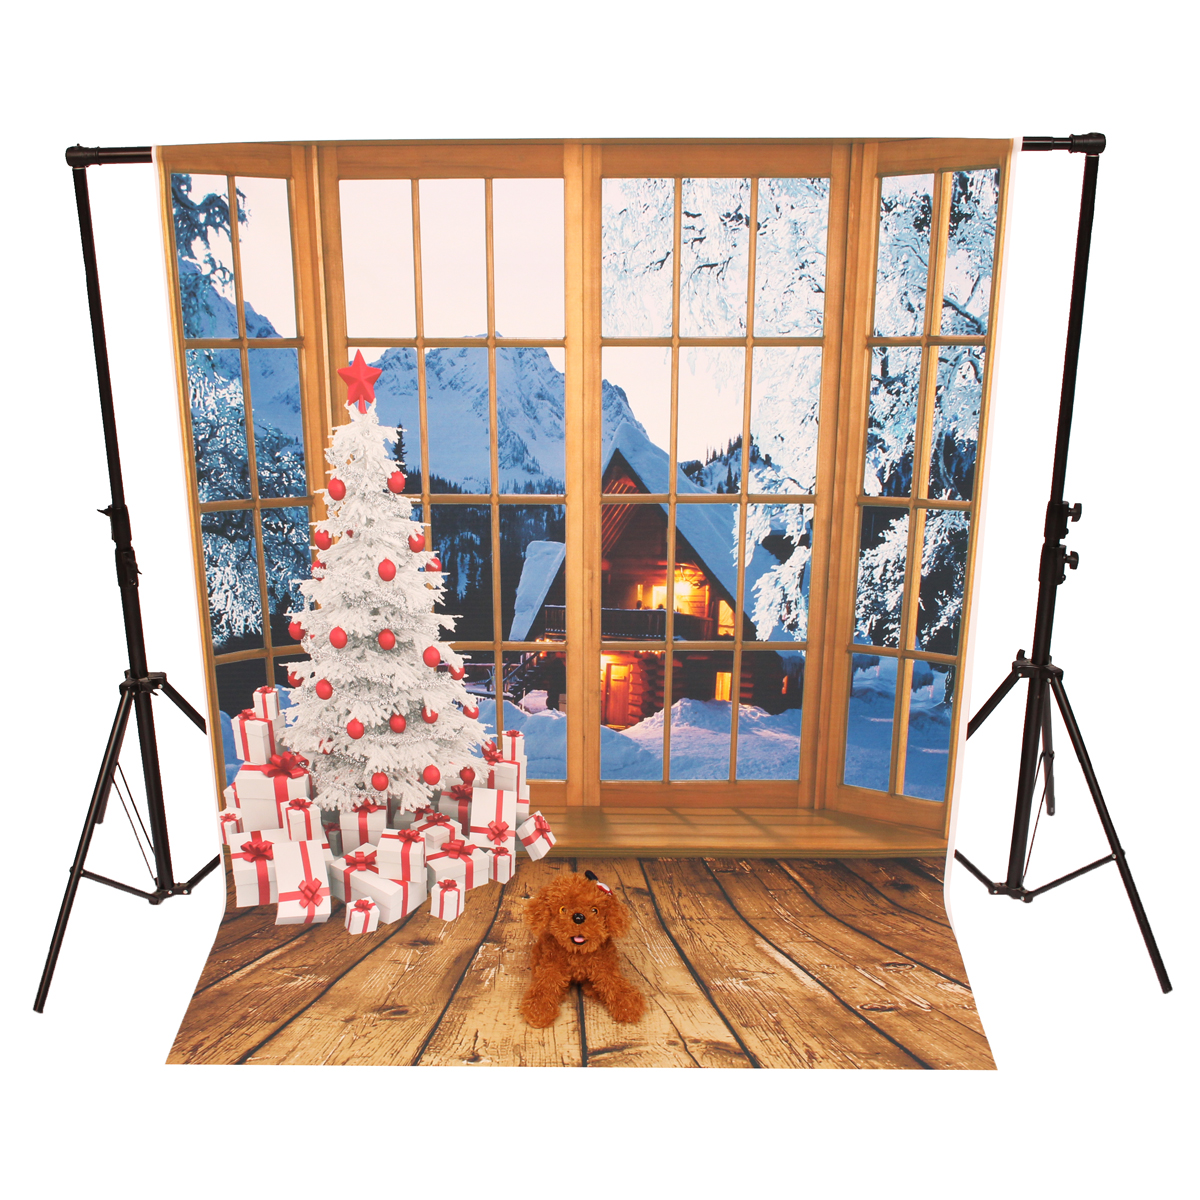 Mohoo-5x7ft-15x21m-Christmas-Backdrop-Photo-Window-Backdrop-with-Wooden-Floor-Christmas-Tree-Snow-Co-1958159-9